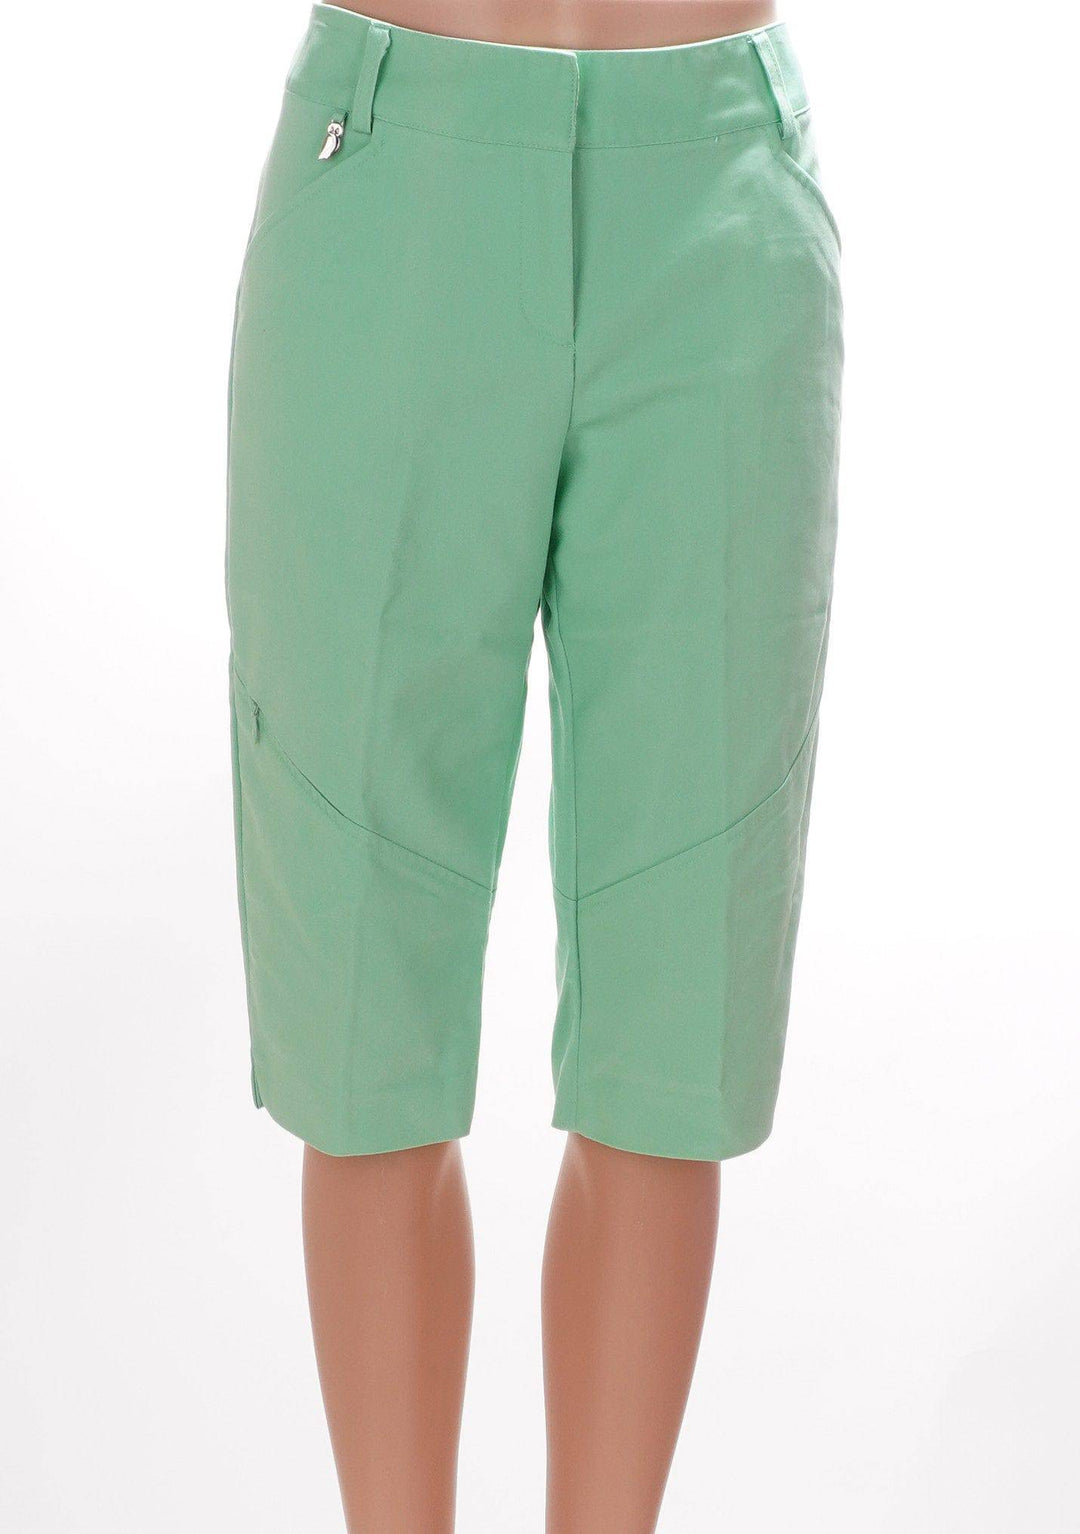 Sport Haley Lime Green / 6 / Consigned Sport Haley Short - Lime Green - Size 6